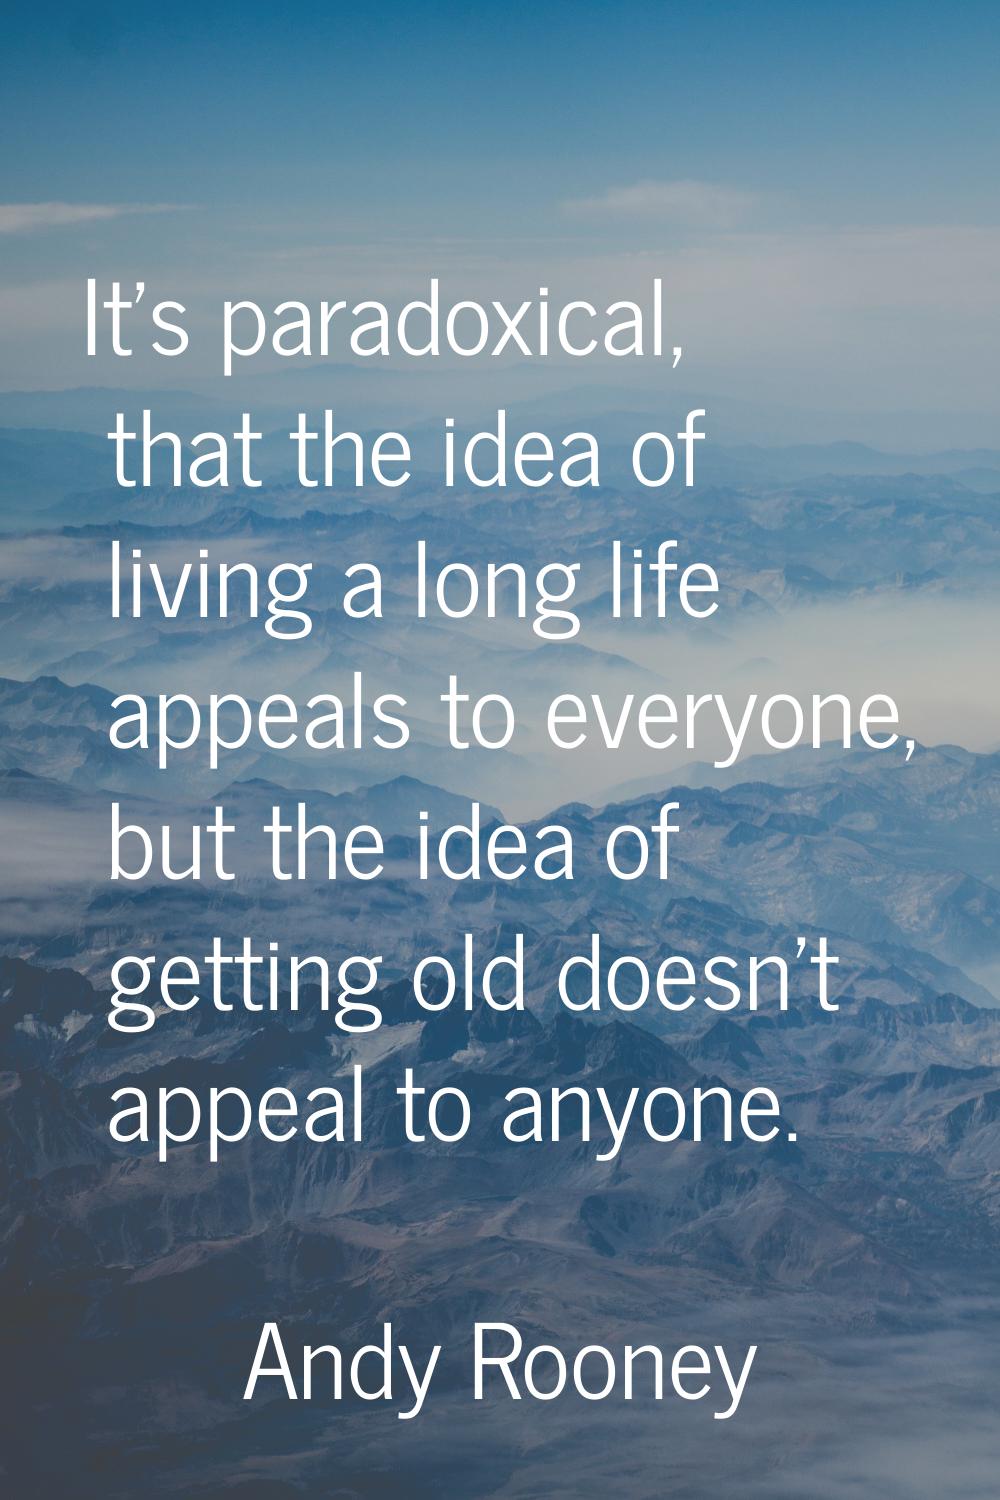 It's paradoxical, that the idea of living a long life appeals to everyone, but the idea of getting 